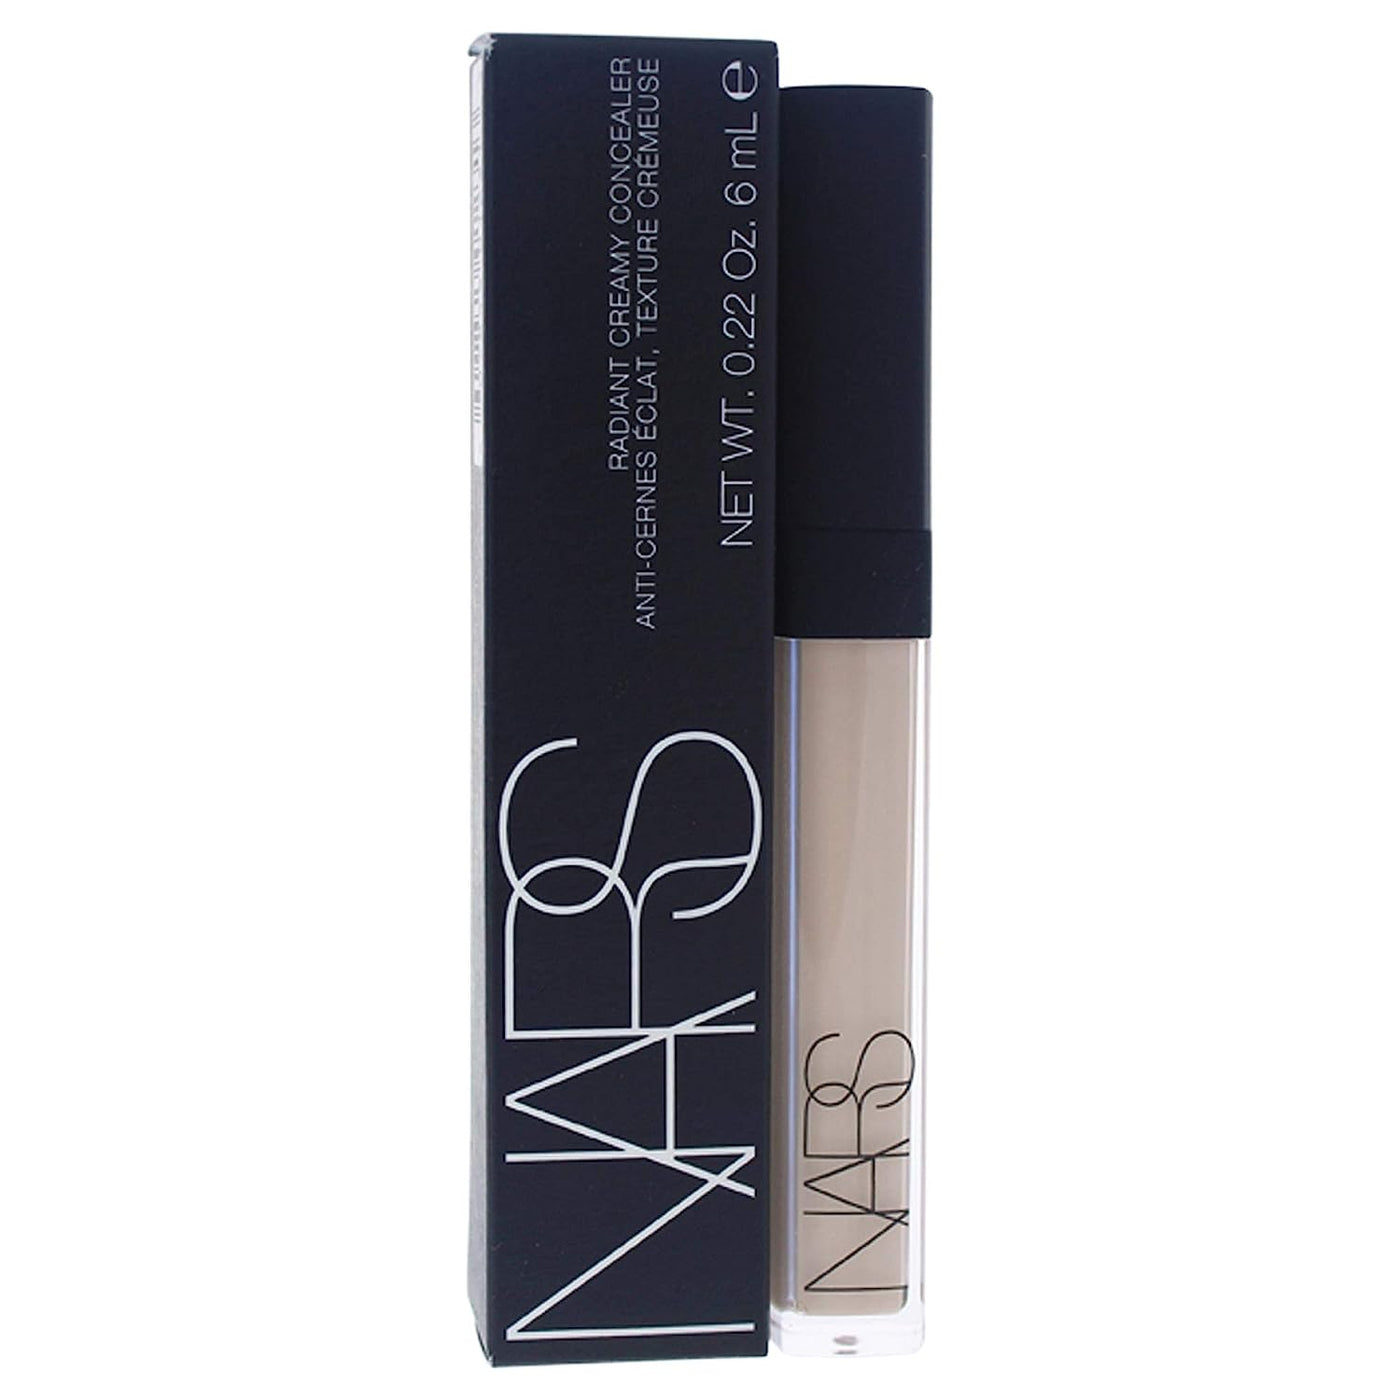 NARS Radiant Creamy Concealer , Chantilly, 0.22 Ounce